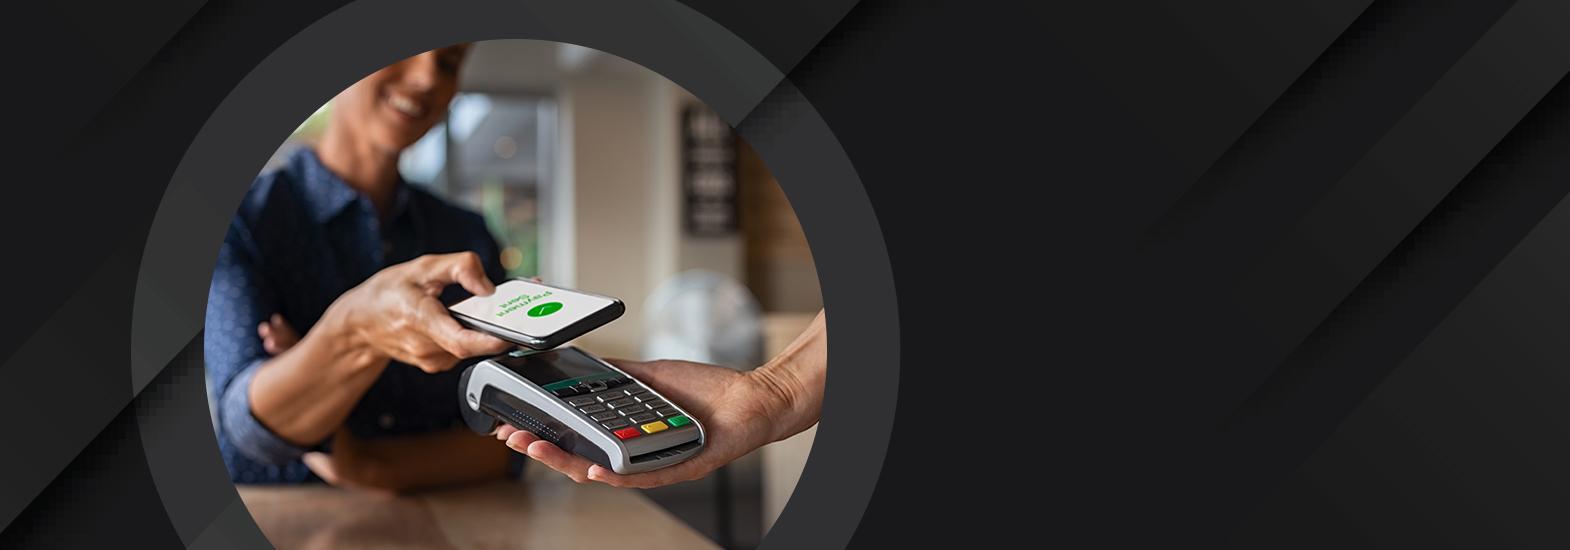 Why Demand for In-Store Contactless Payments is Here to Stay